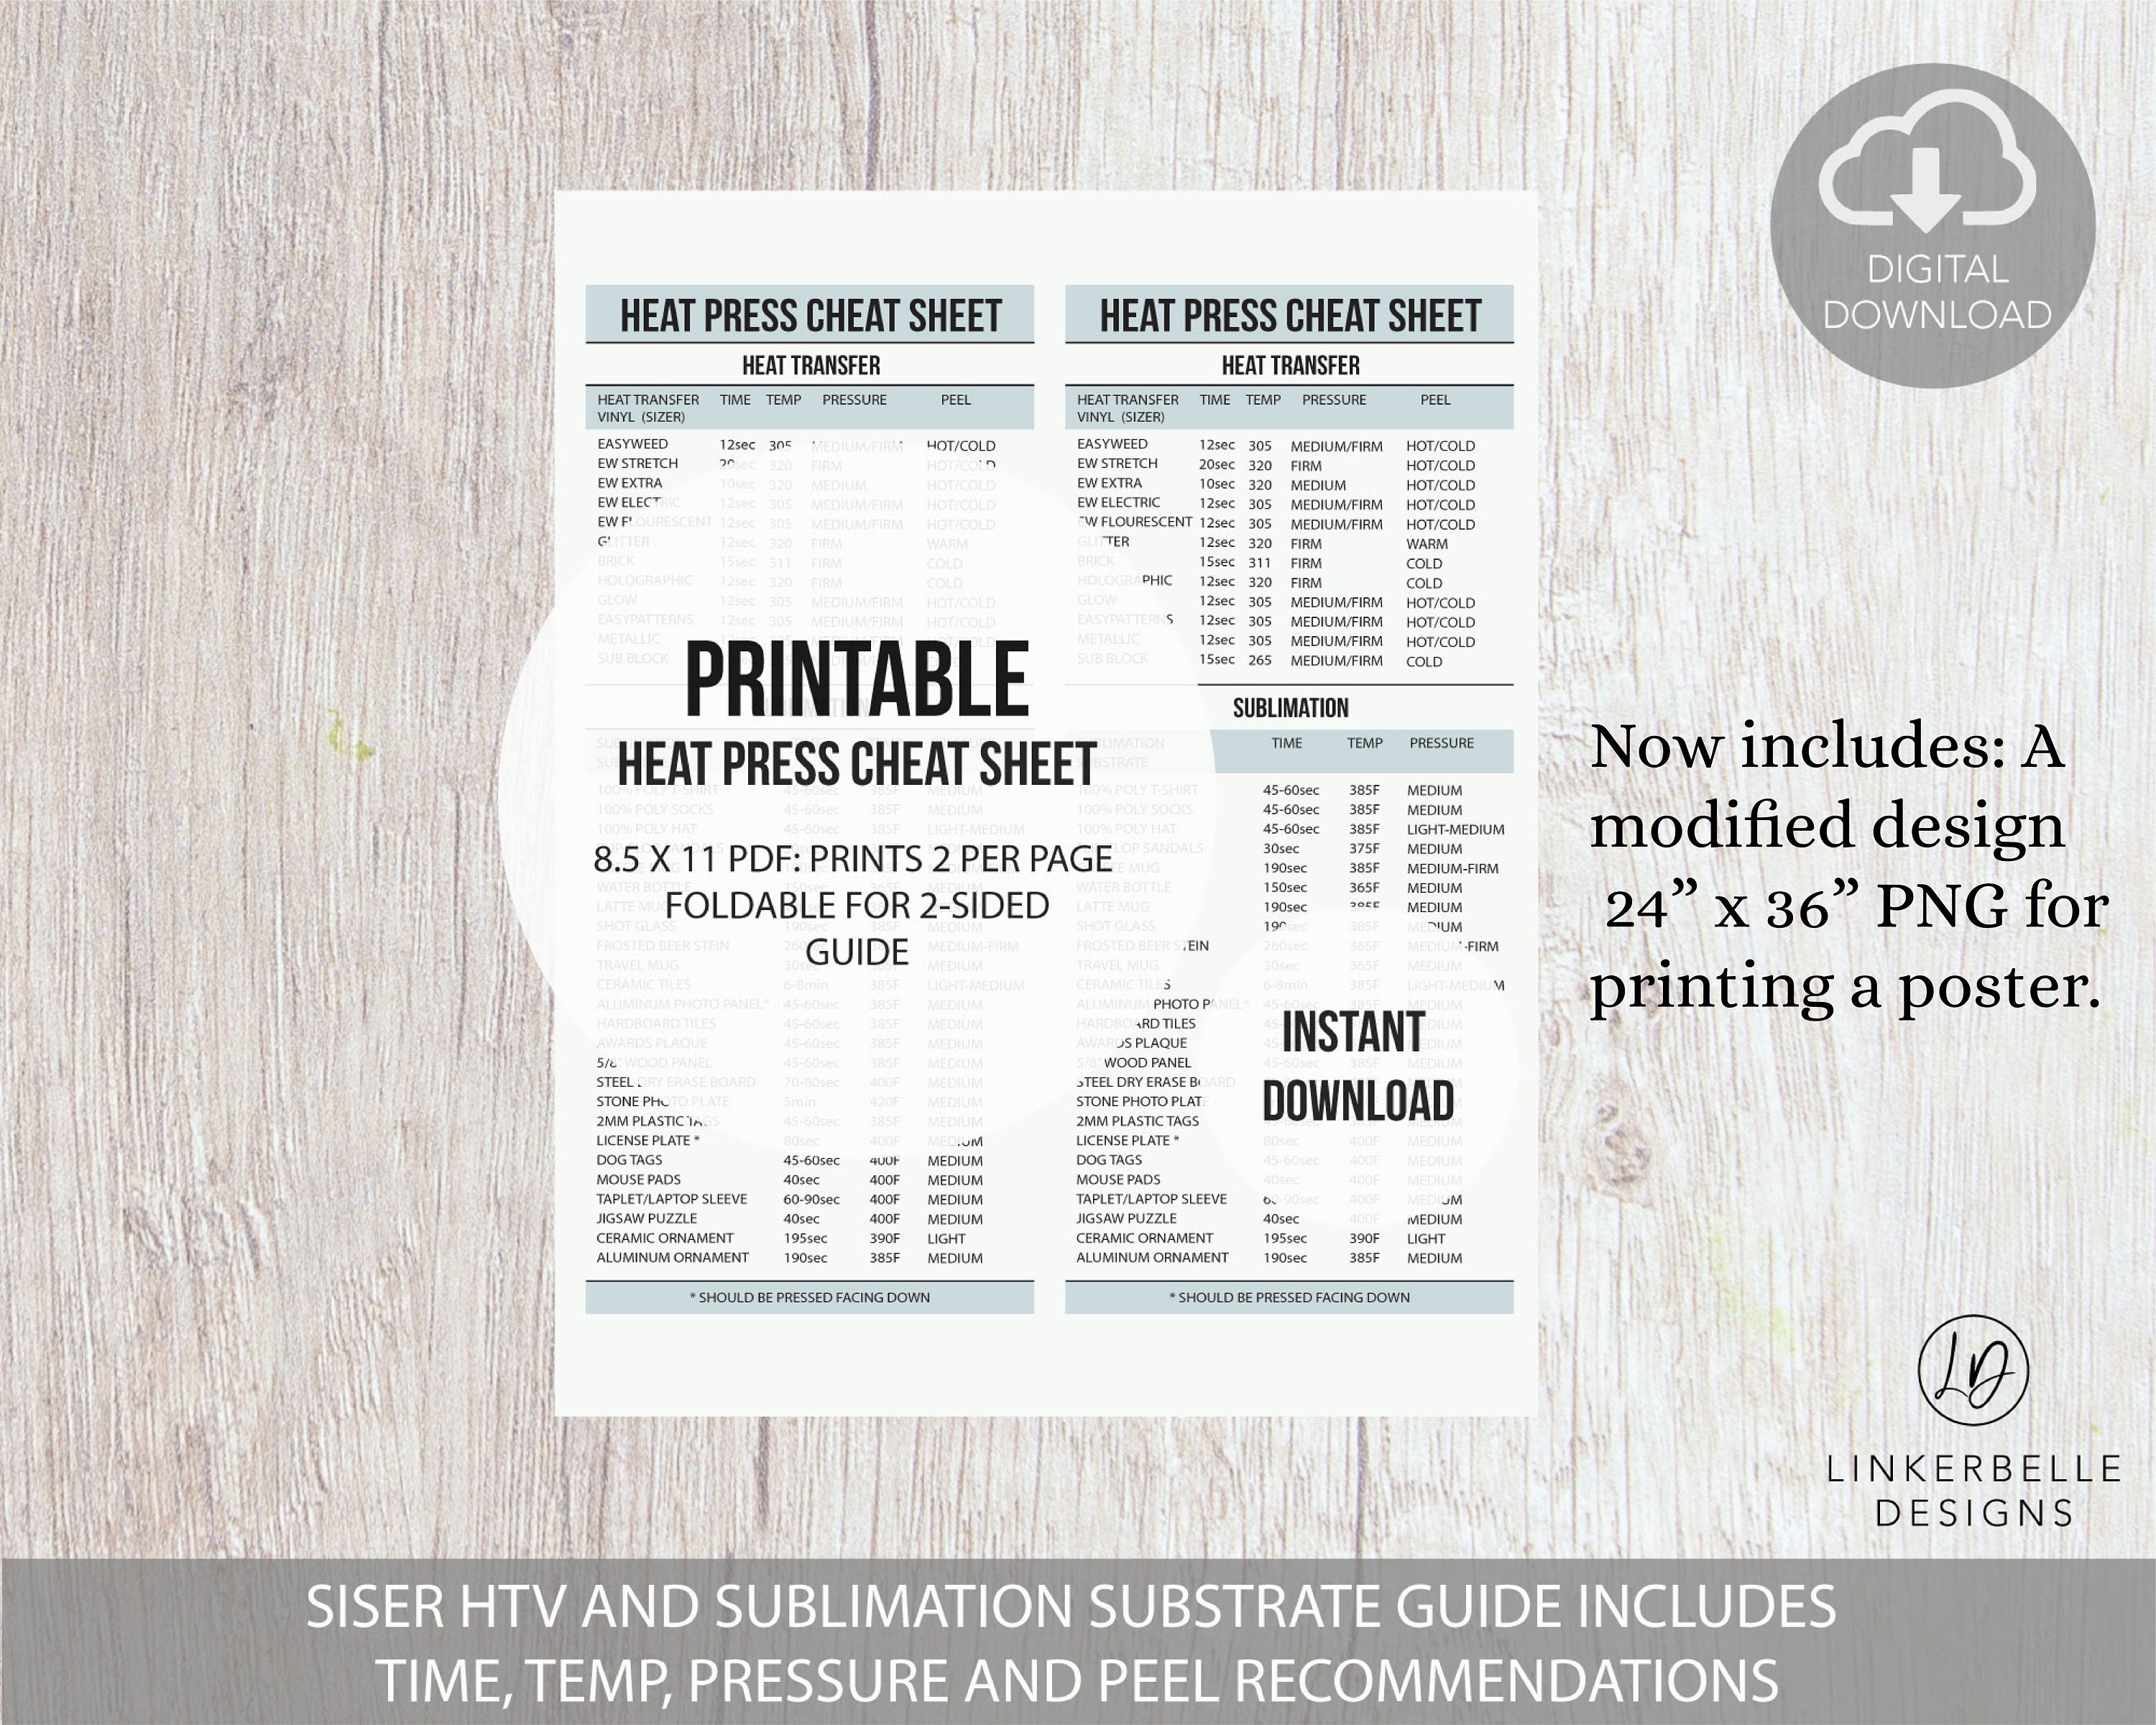 Ht-sublidark 8.5 X 11 Sheet sublimation Paper That Works on Dark Fabric Htv  Printable Sheets 